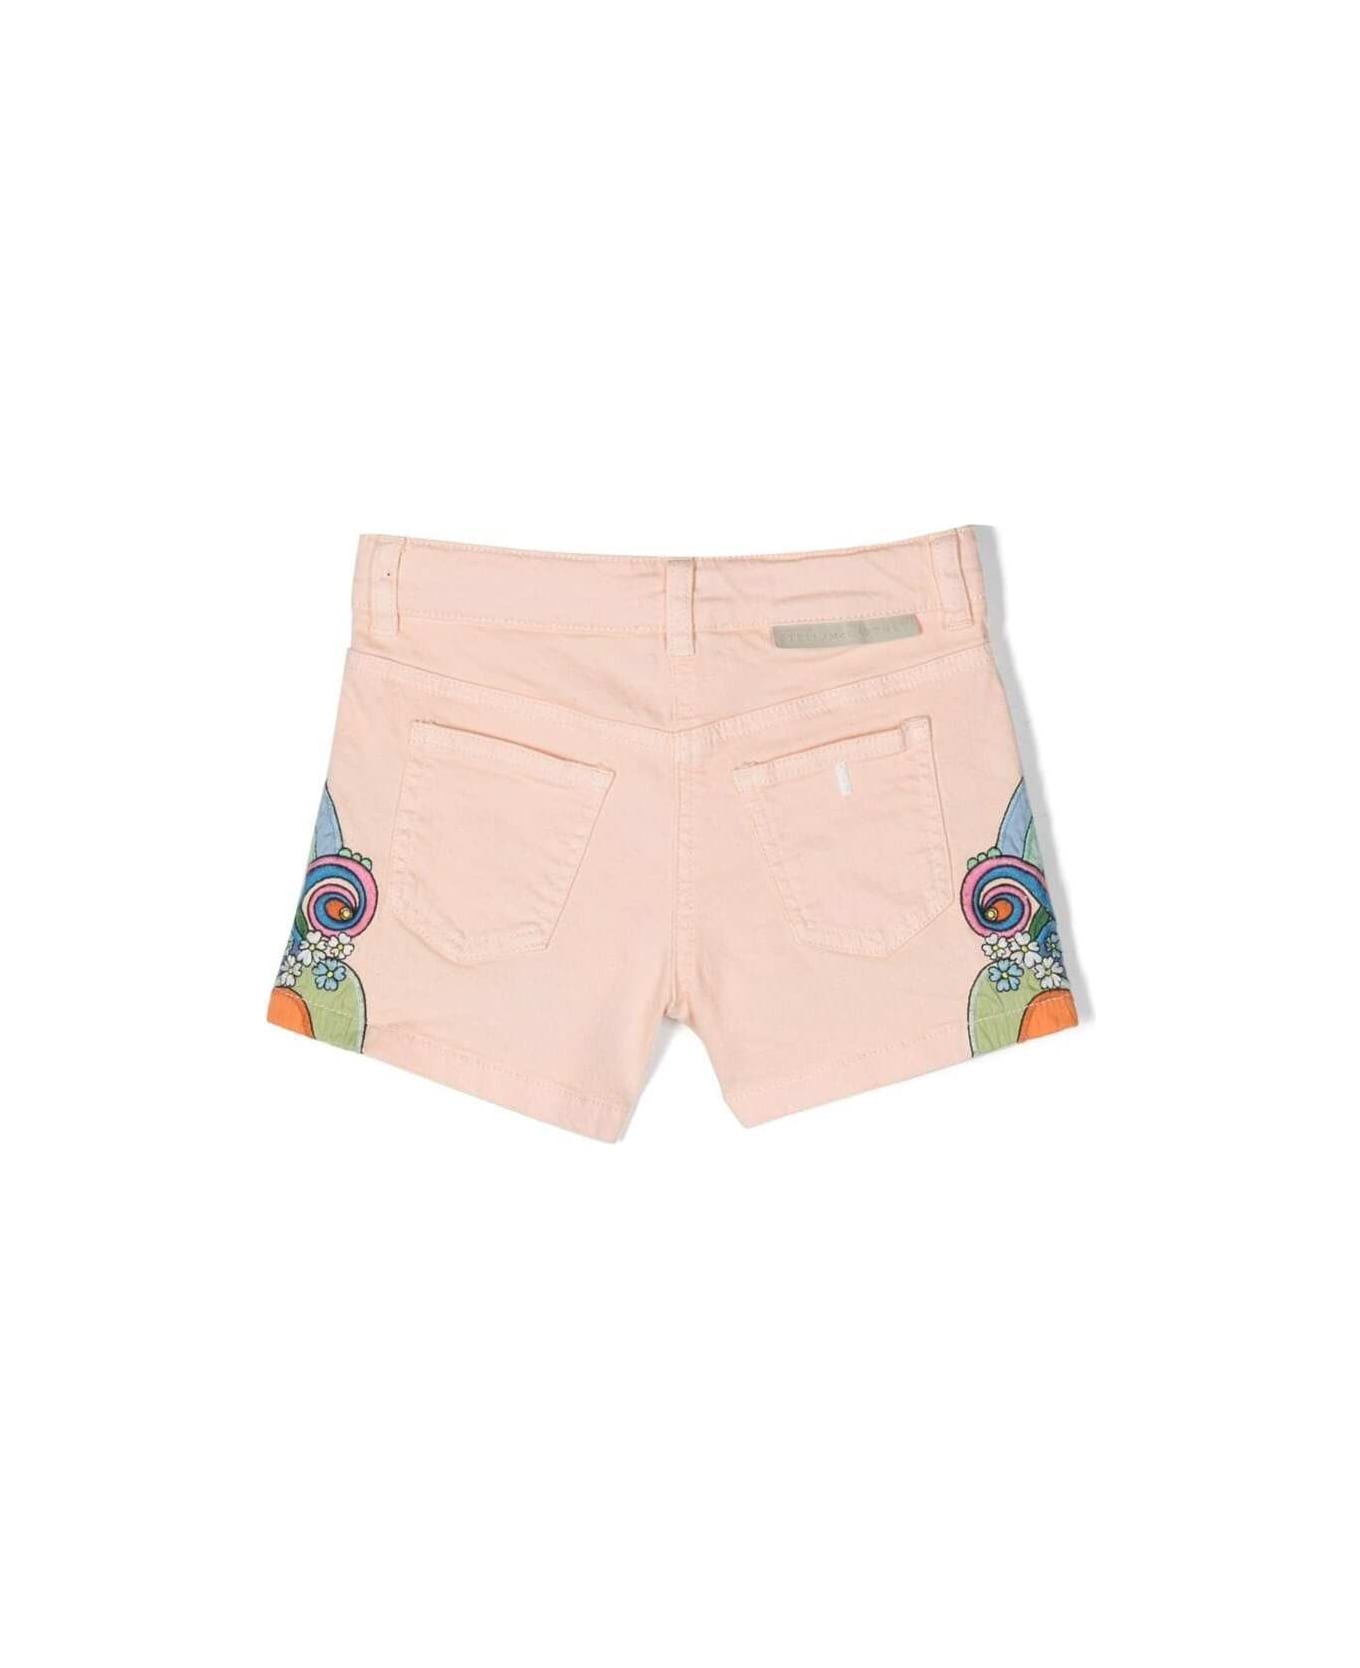 Stella McCartney Kids Love To Dream Printed Shorts In Pink Cotton Girl - Pink ボトムス